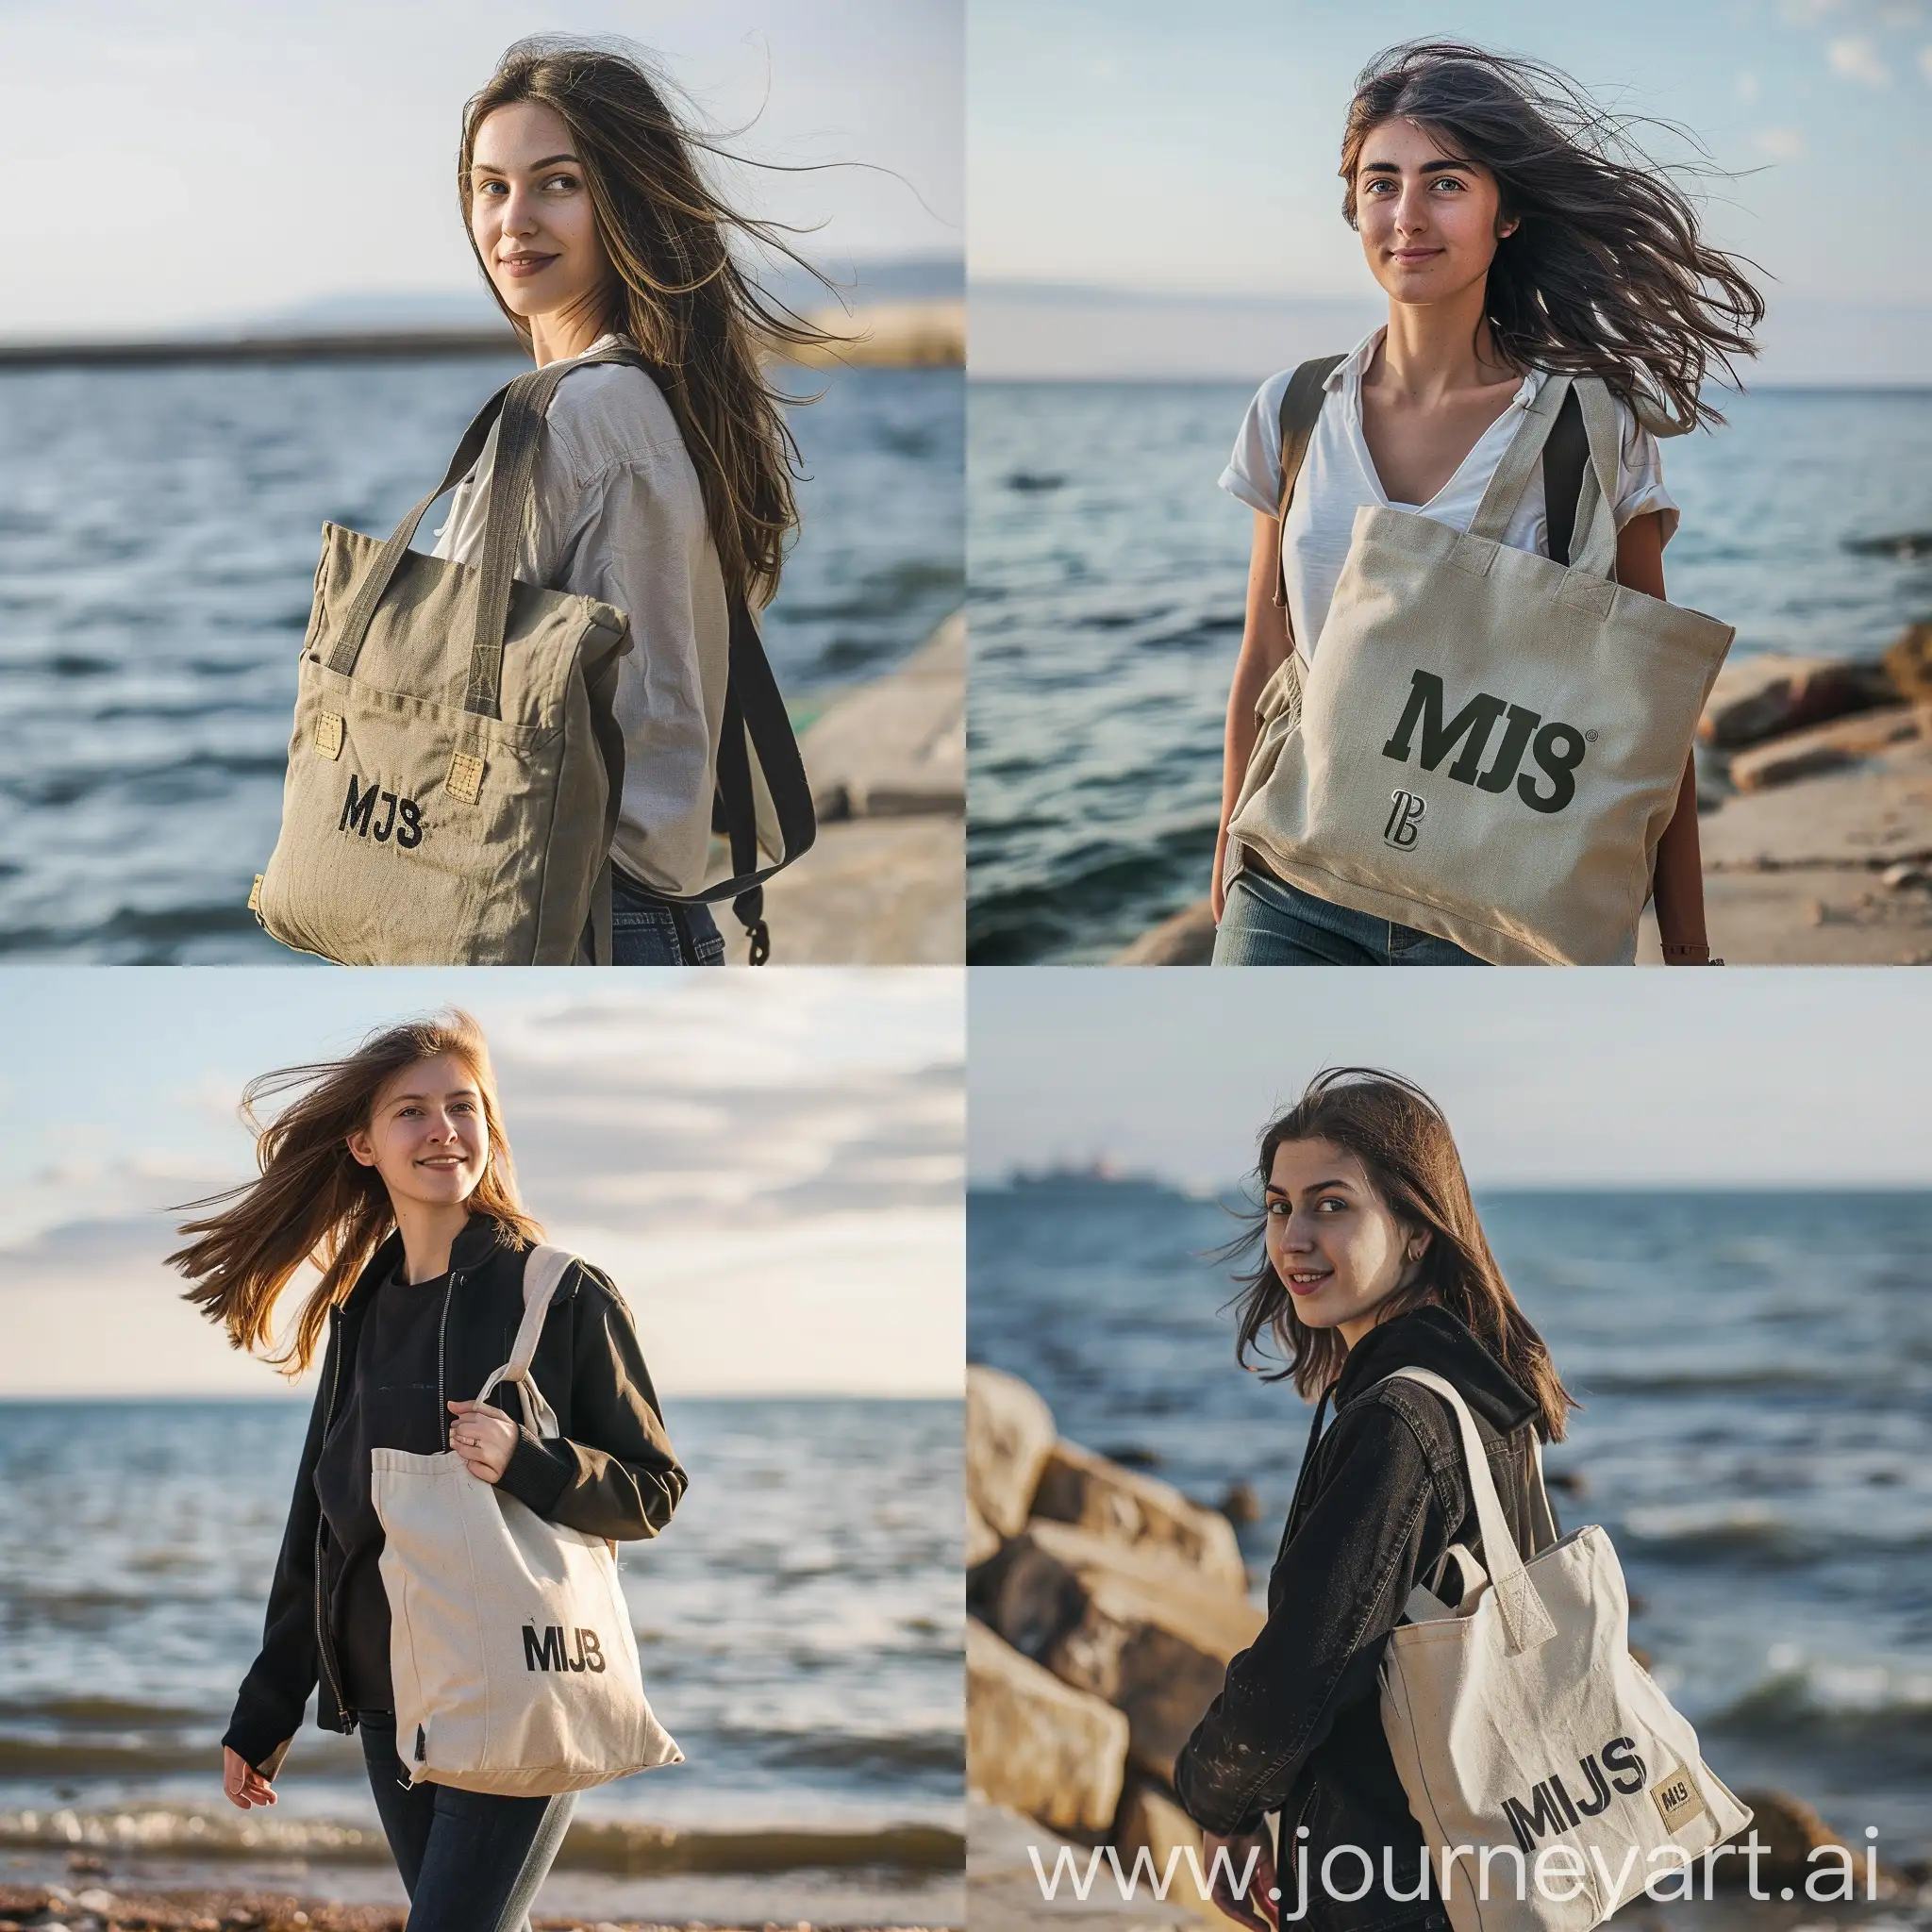 Relaxed-Young-Woman-Carrying-MJS-Canvas-Bag-by-the-Seaside